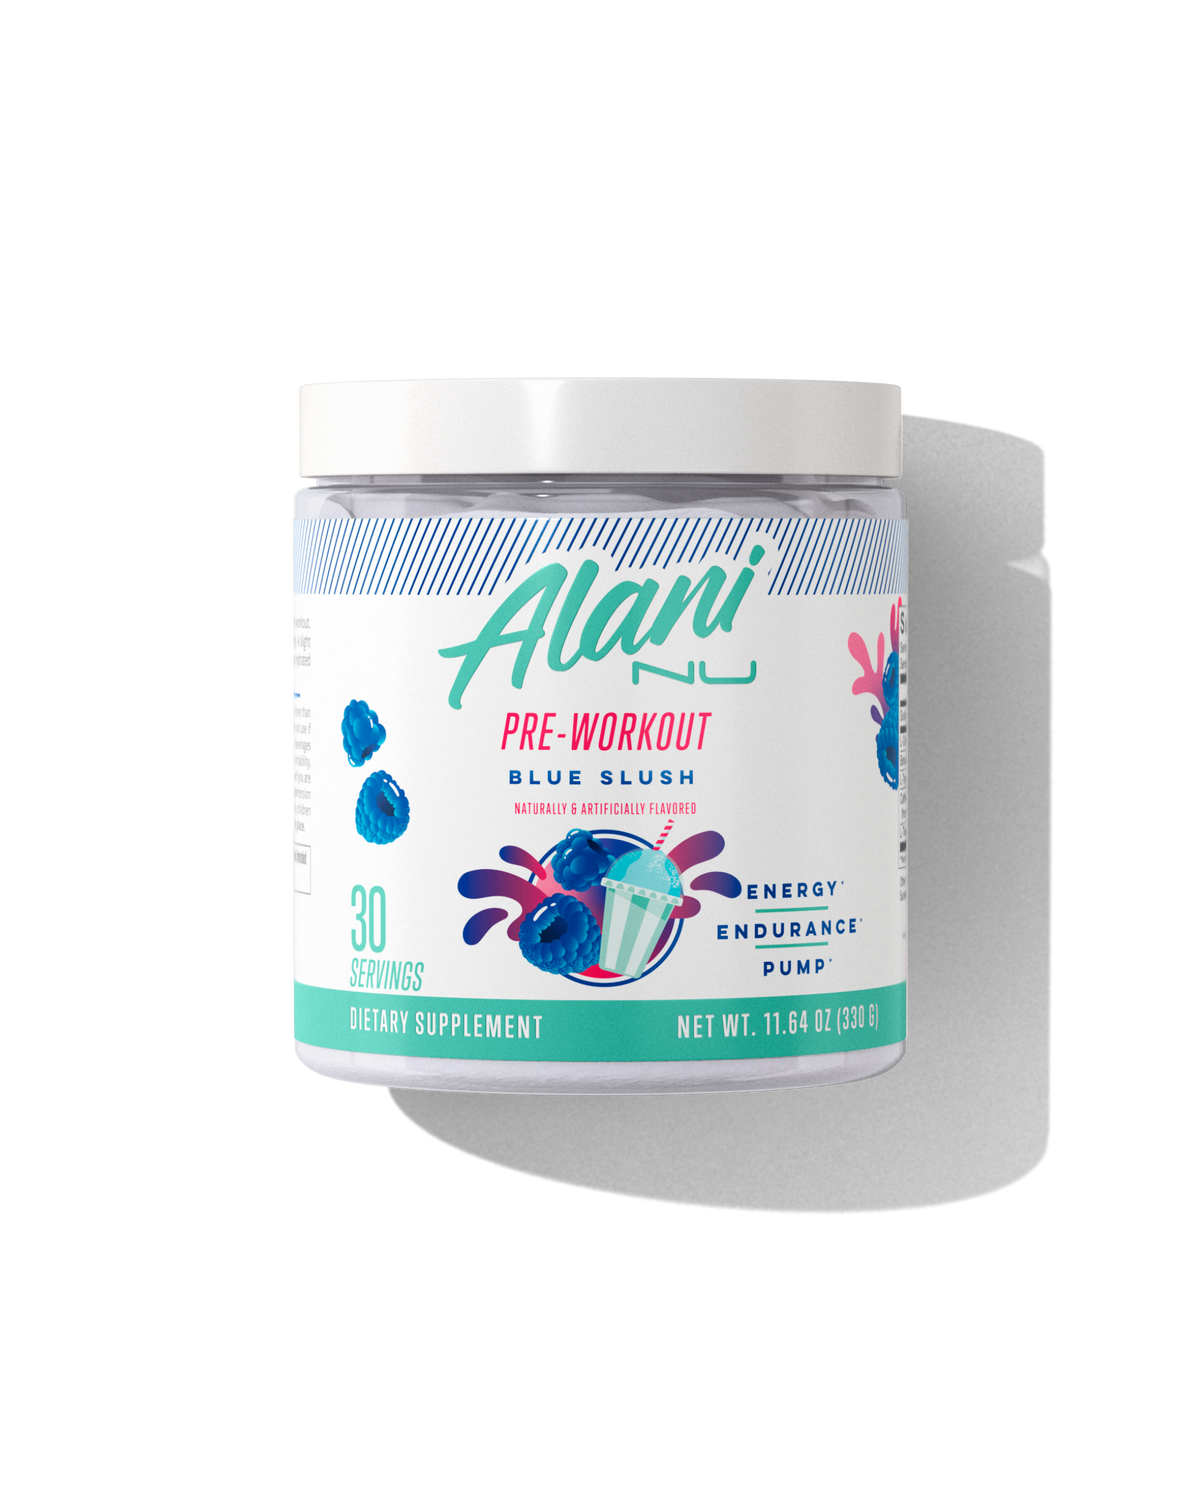 A 30 serving container Pre-Workout in Blue Slush flavor.